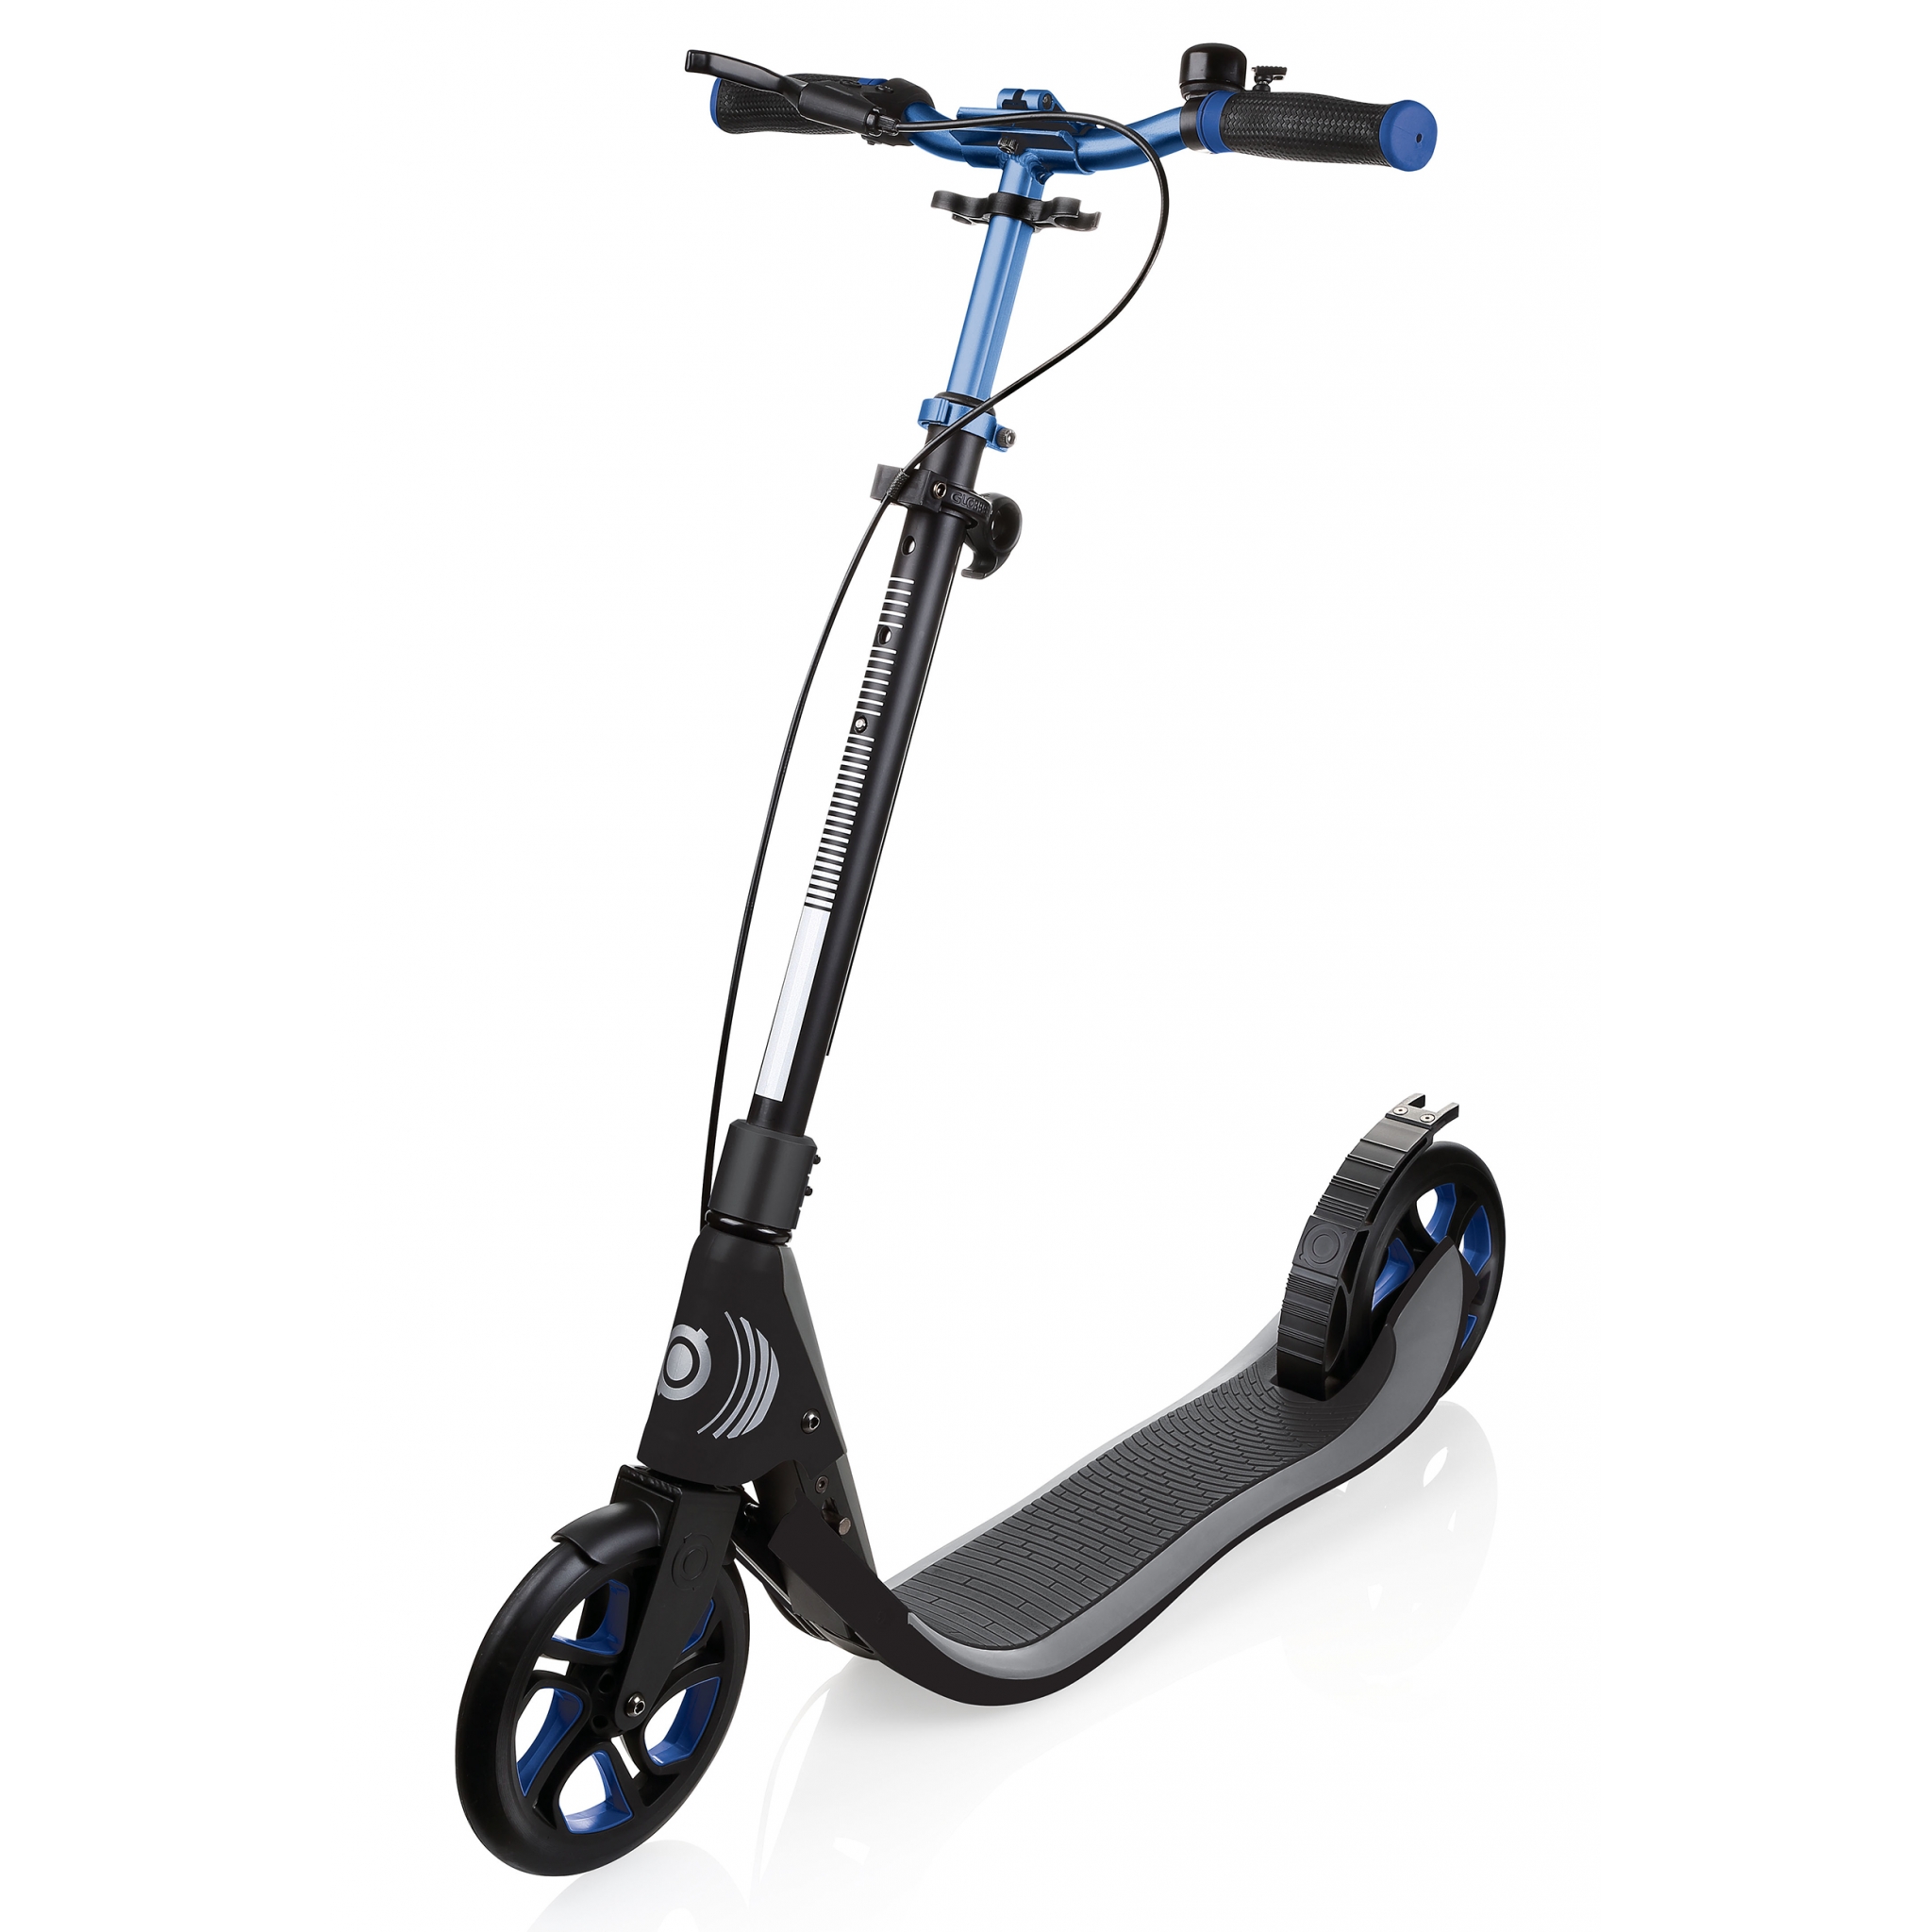 foldable scooter for adults with handbrake - Globber ONE NL 205 DELUXE 1